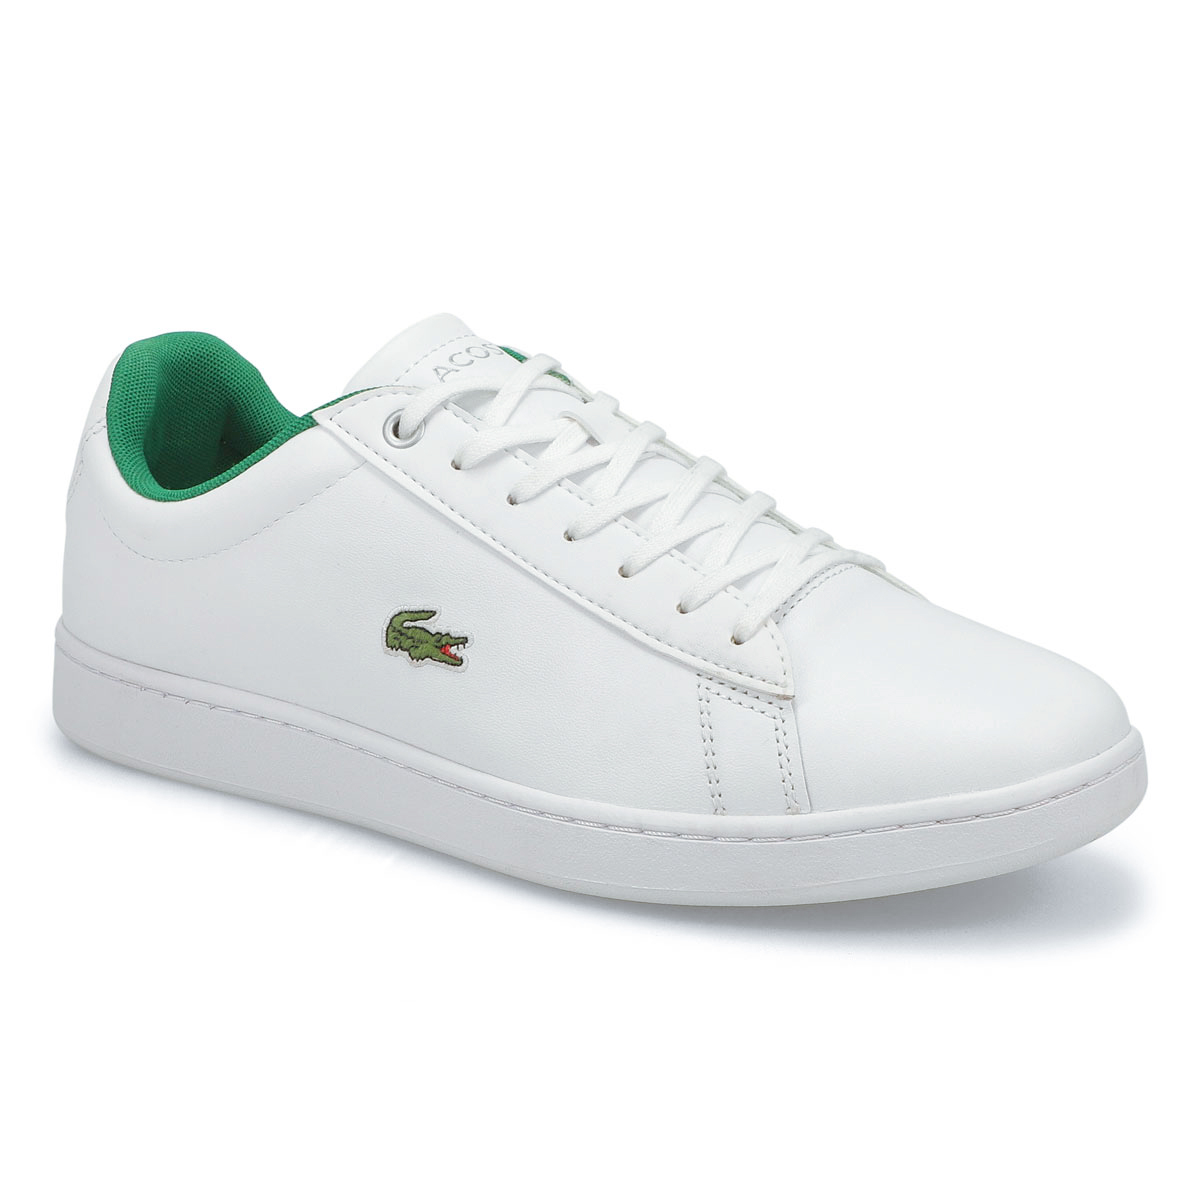 lacoste shoes canada